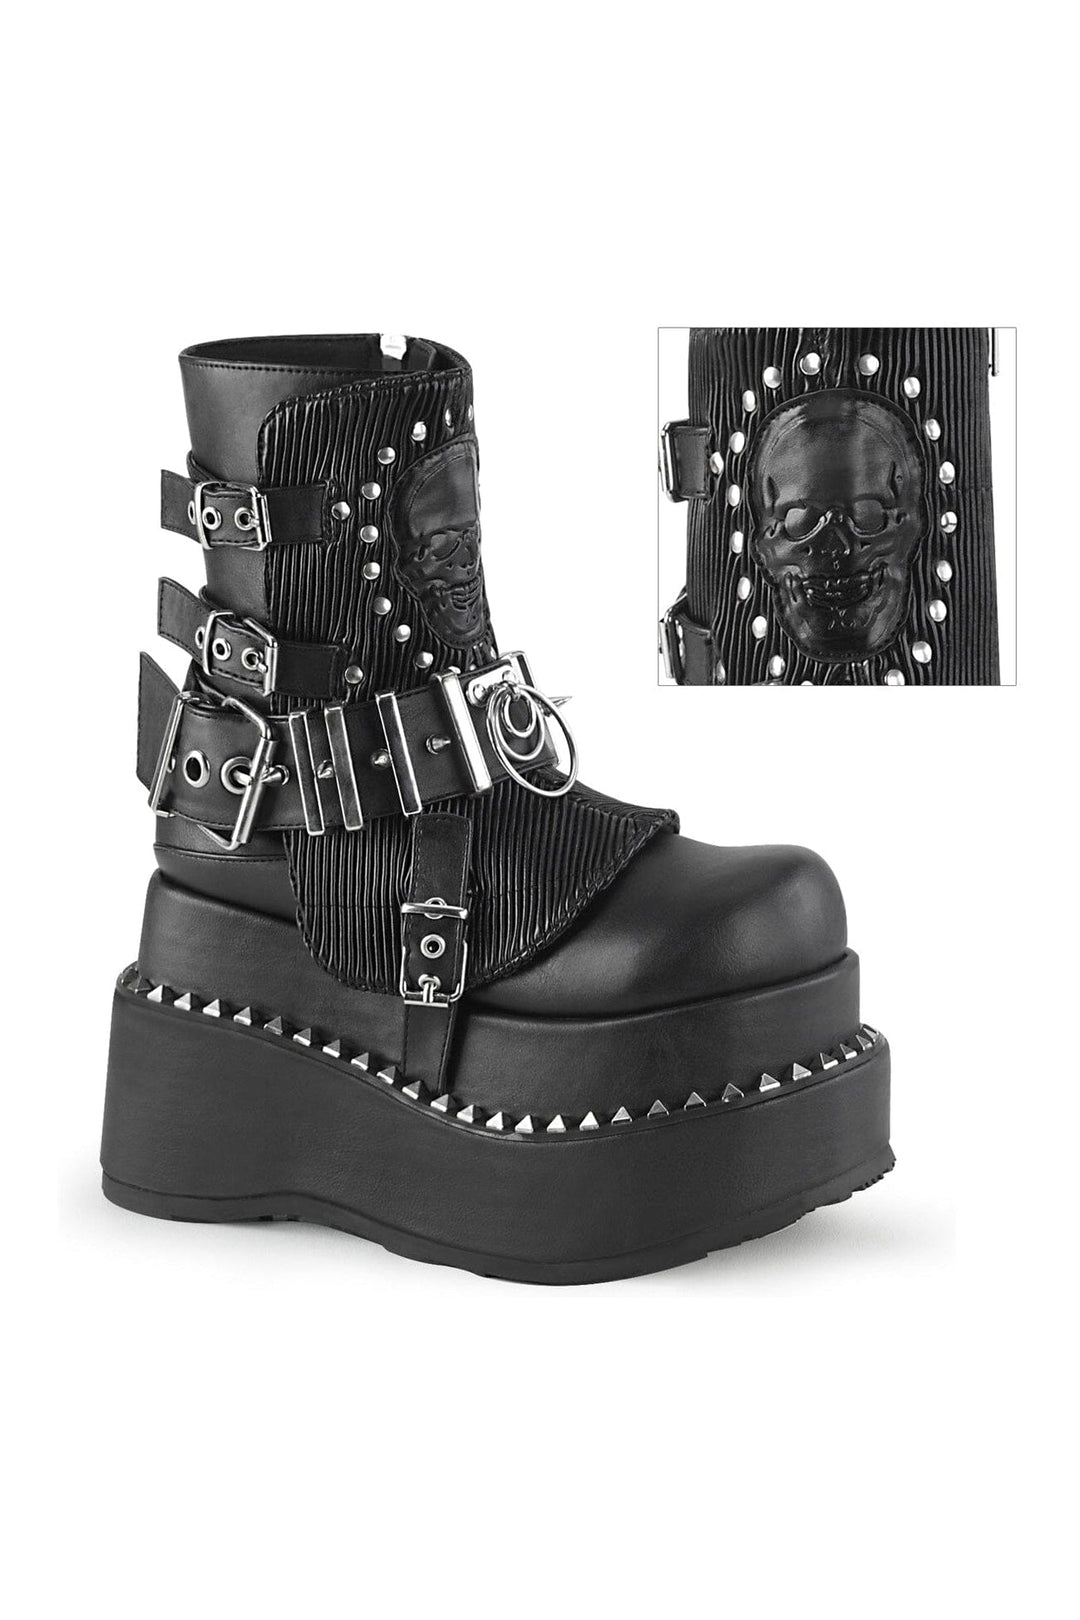 BEAR-150 Black Vegan Leather Ankle Boot-Ankle Boots-Demonia-Black-10-Vegan Leather-SEXYSHOES.COM